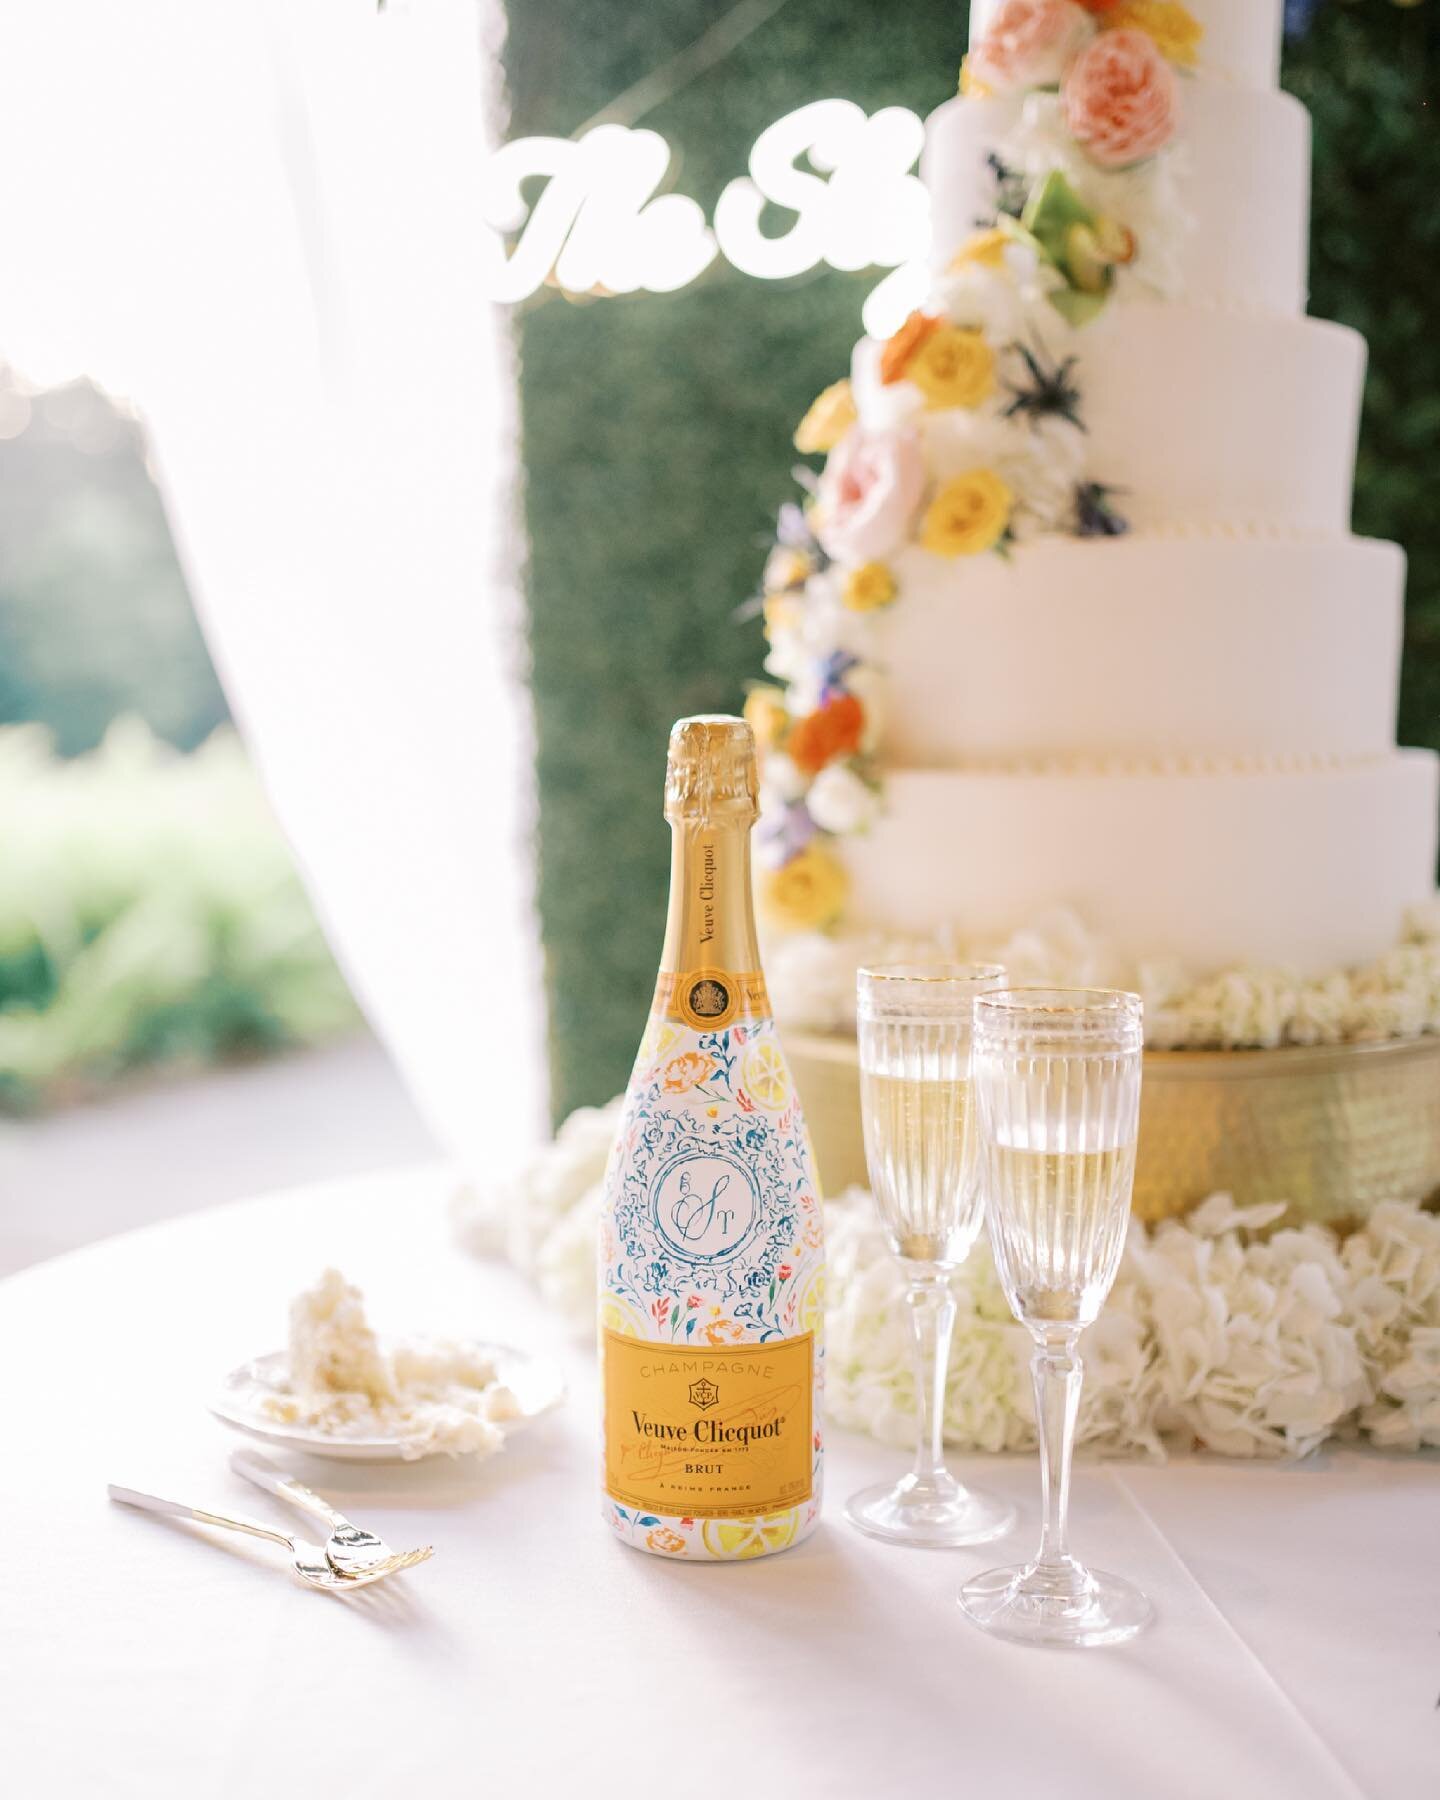 Life&rsquo;s too short. Eat the cake, drink the champagne. 
I love this mid-reception shot from this spring wedding!
.
Photography @haintbluecollective 
Planning @makeitperfectevents1
Venue and Catering @mooresmillclub
Farmhouse tables, string ligh